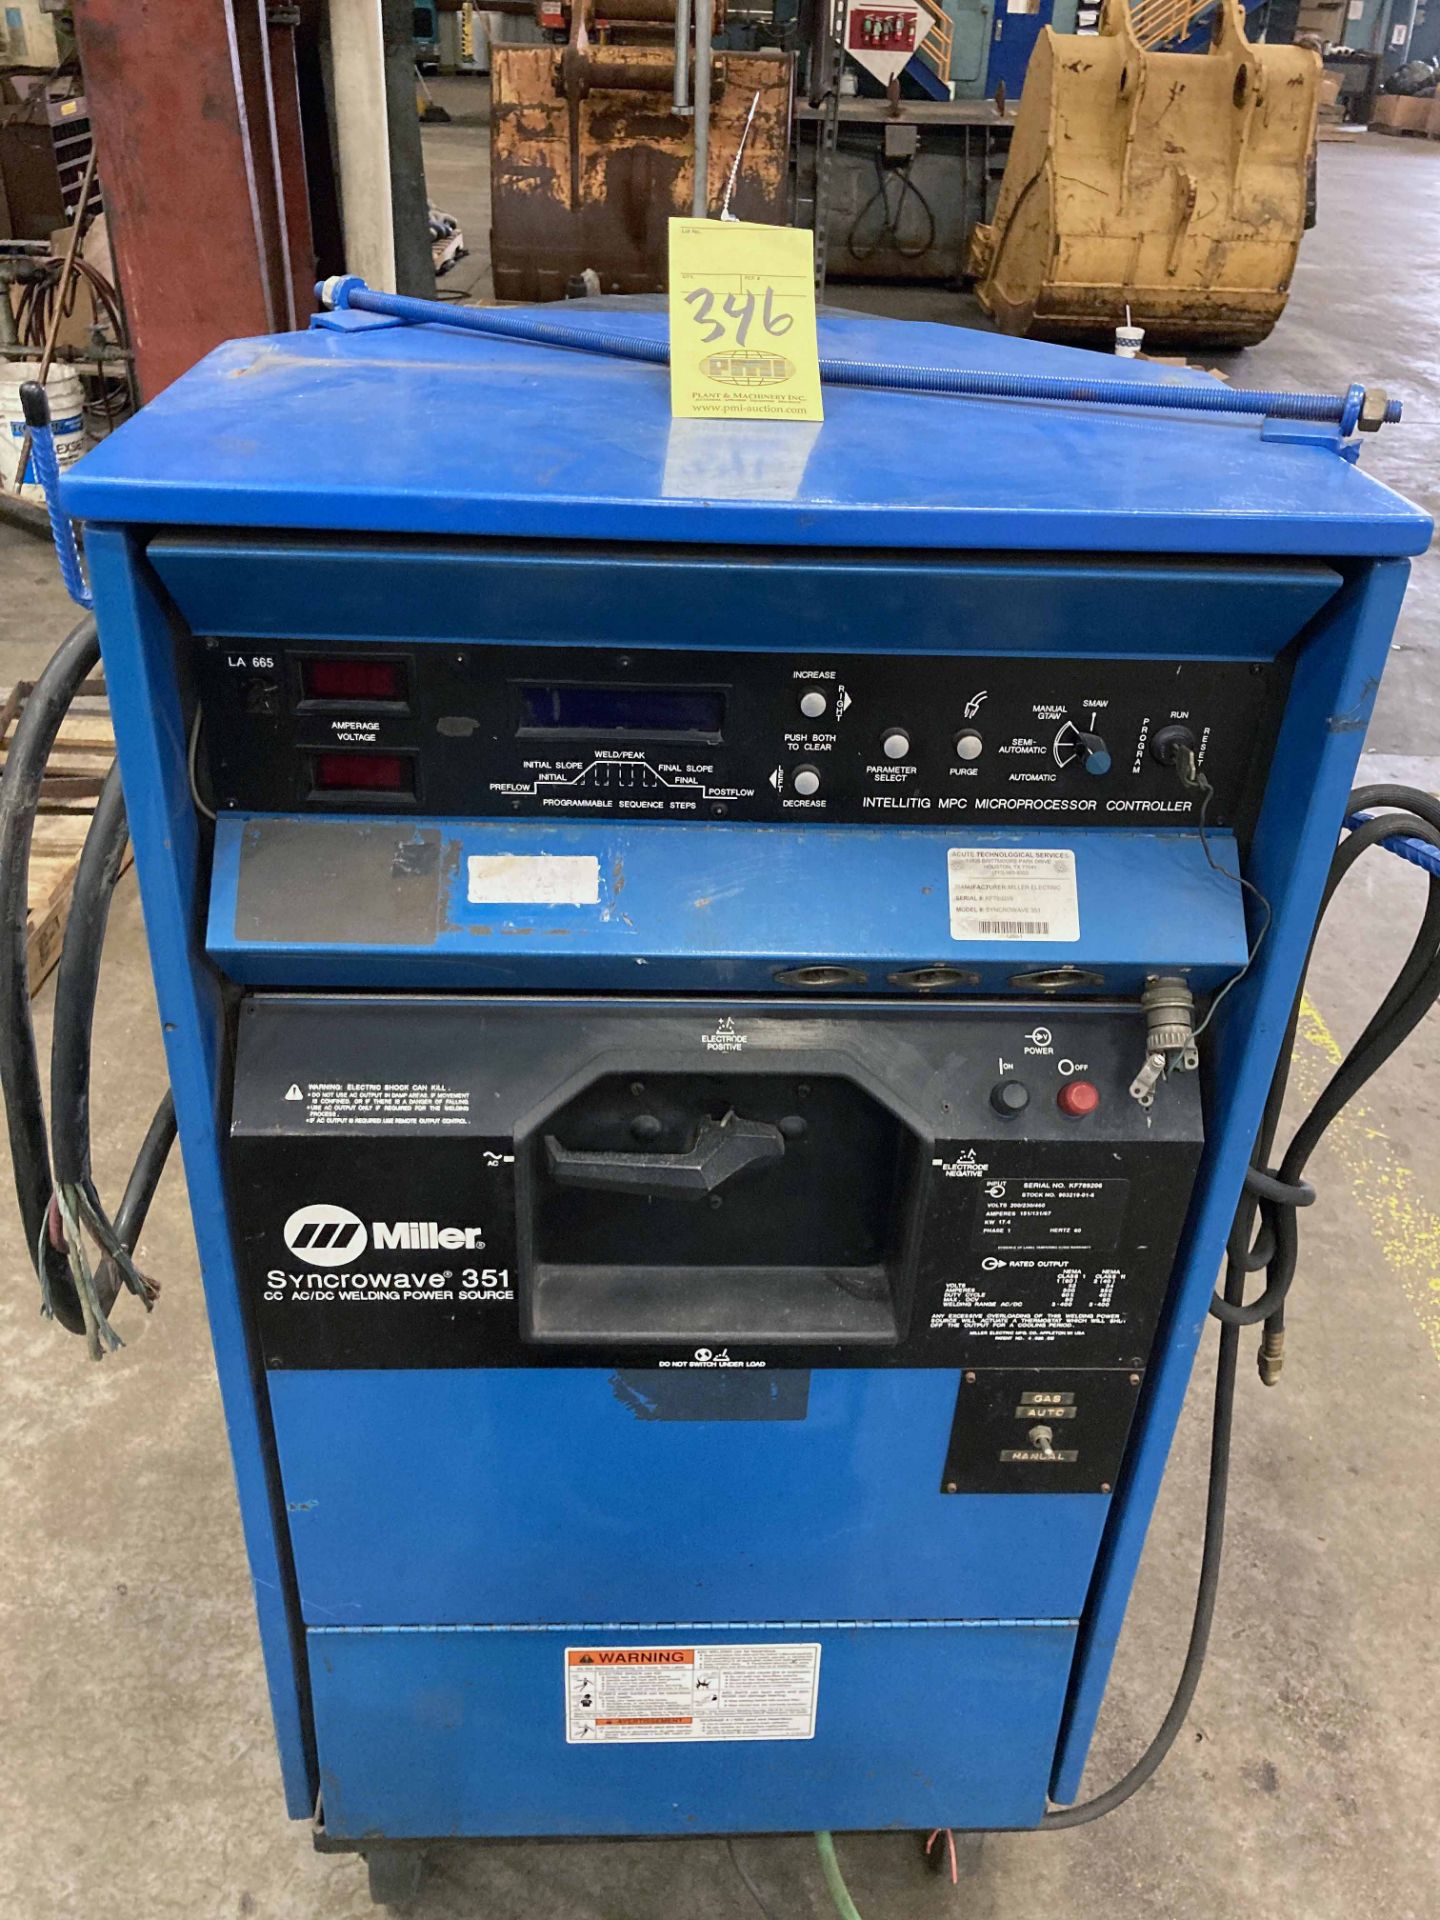 WELDING MACHINE, MILLER SYNCROWAVE 351 CC AC/DC, S/N KF789206 (Located at: AF Global/Maass Flange